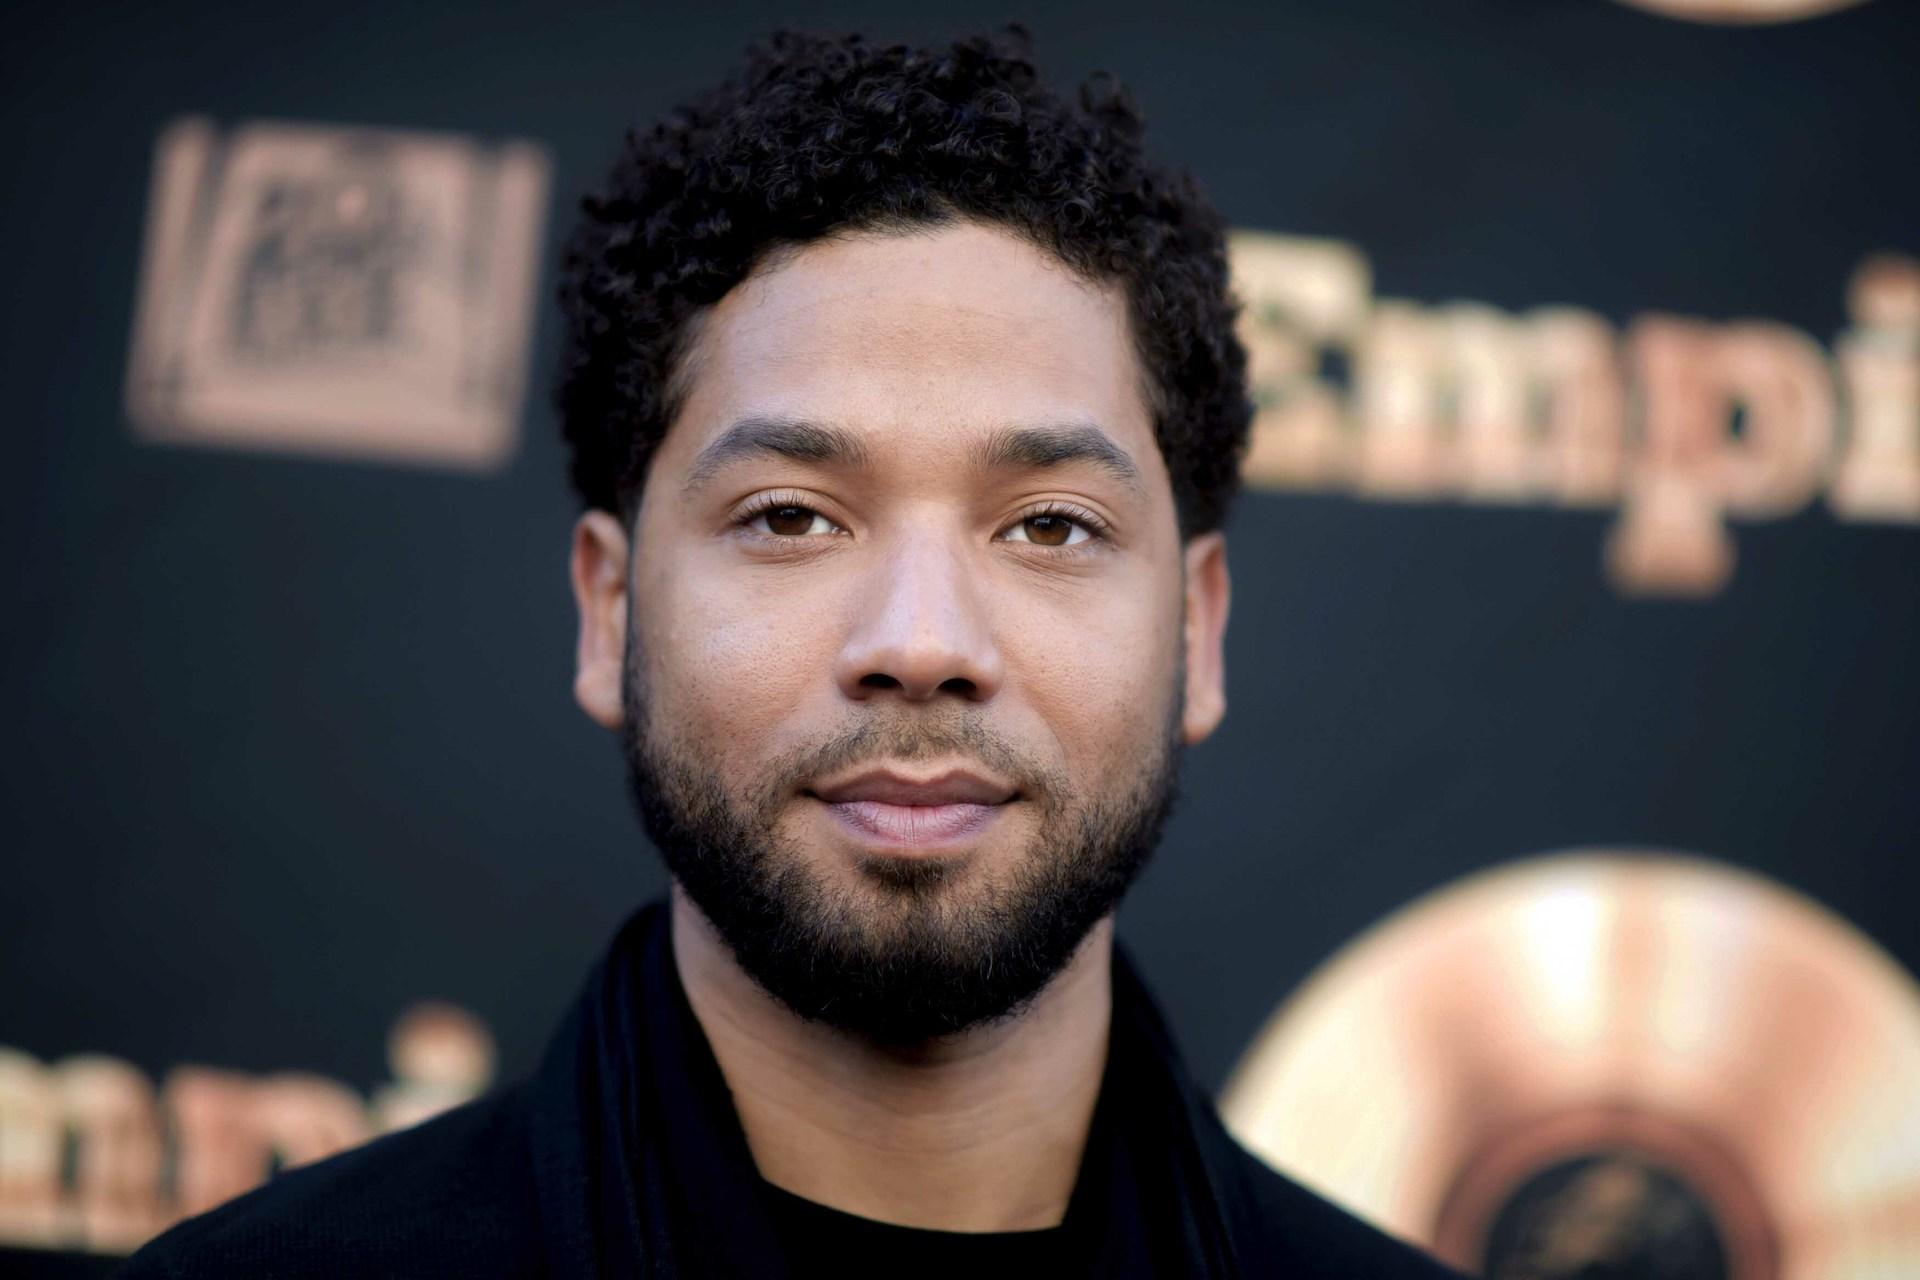 Jussie Smollett, who alleges he was the victim of a brutal racial and homophobic attack, is a former child star who grew up to become a champion of LGBT rights and one of the few actors to play a black gay character on prime-time TV. (Richard Shotwell / Invision / AP, File)